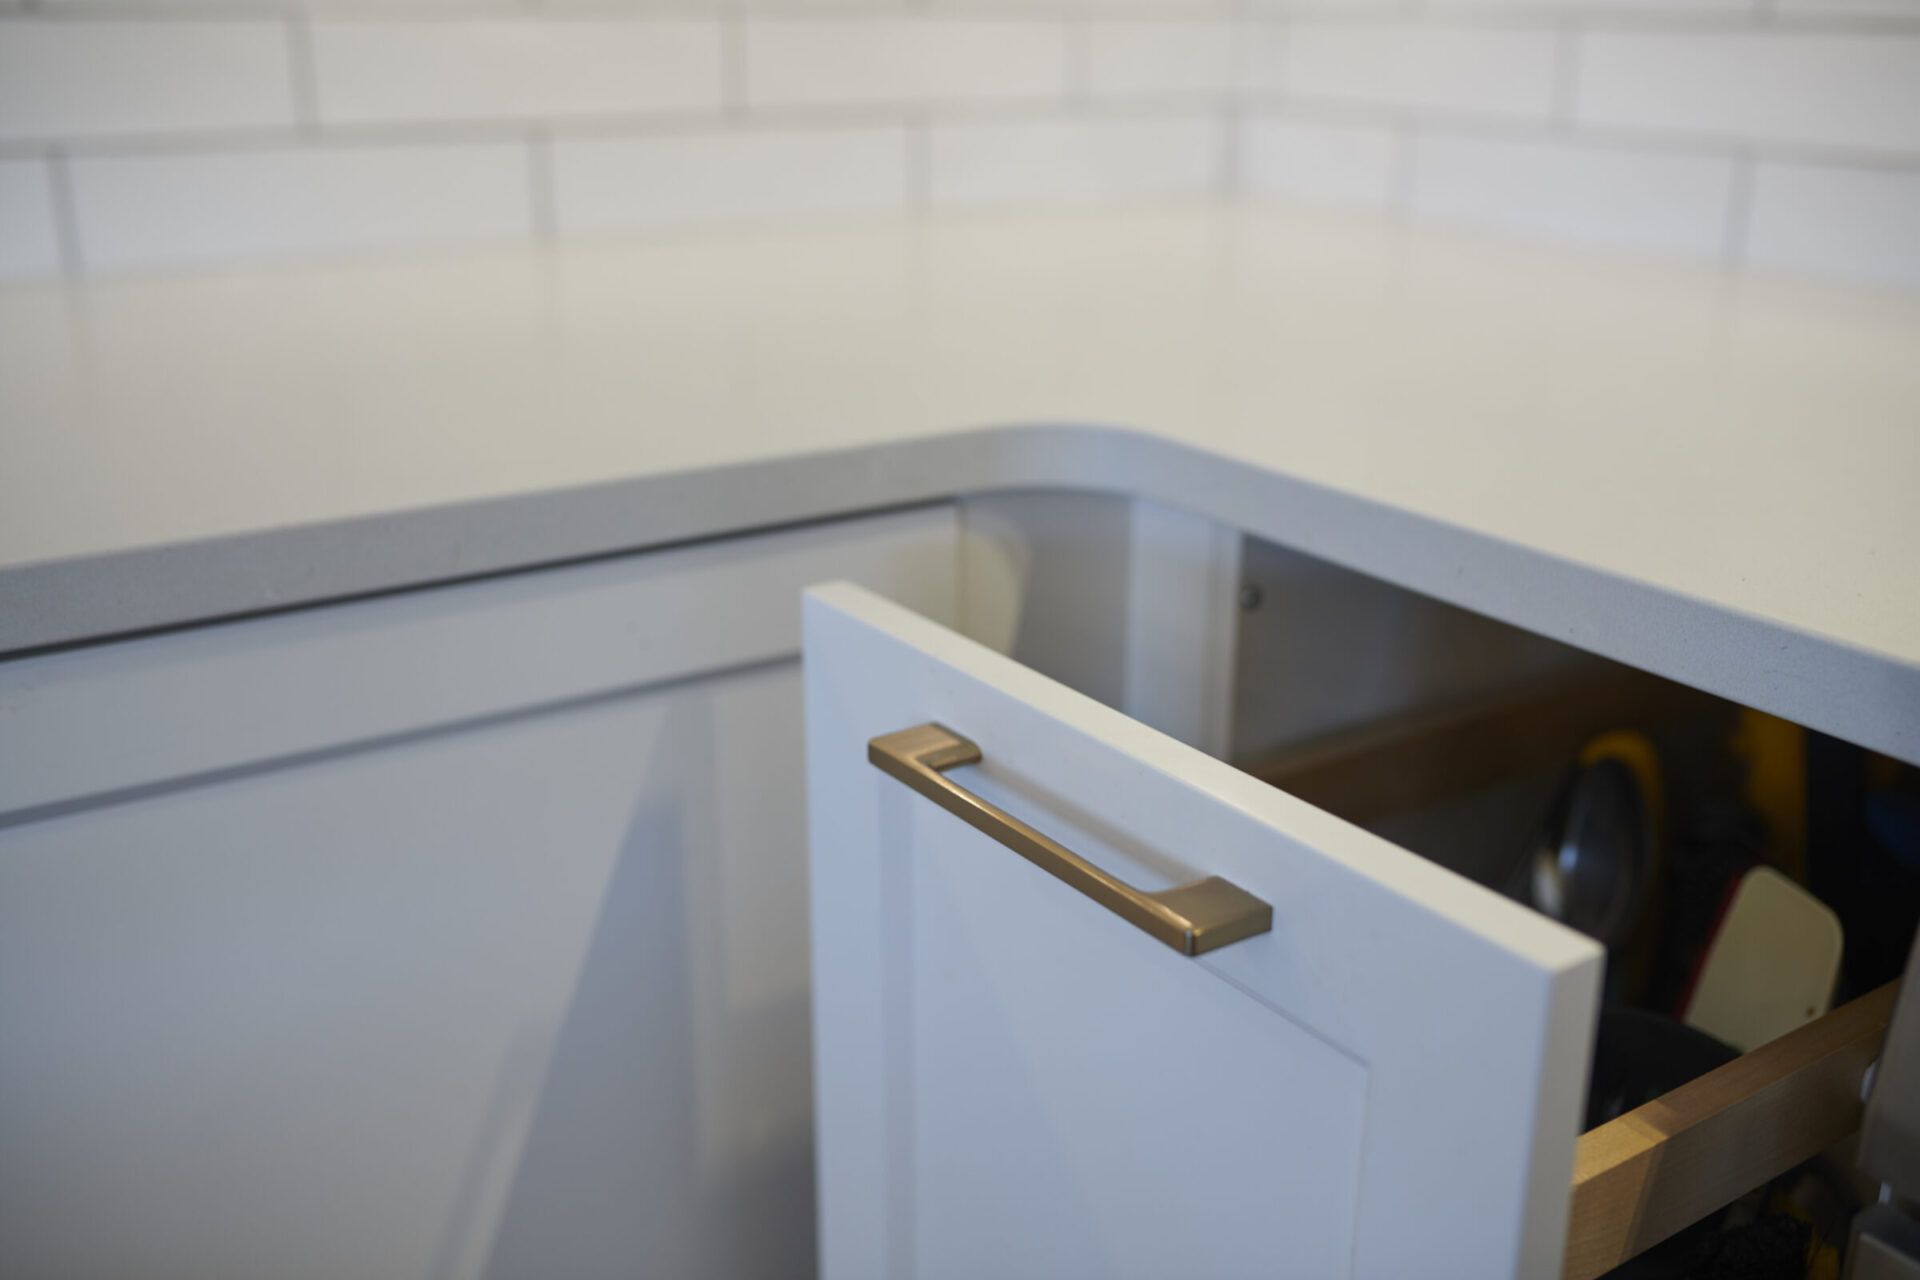 This image shows a partially opened white drawer in a modern kitchen, revealing a glimpse of pots and pans inside and a tiled backsplash above.